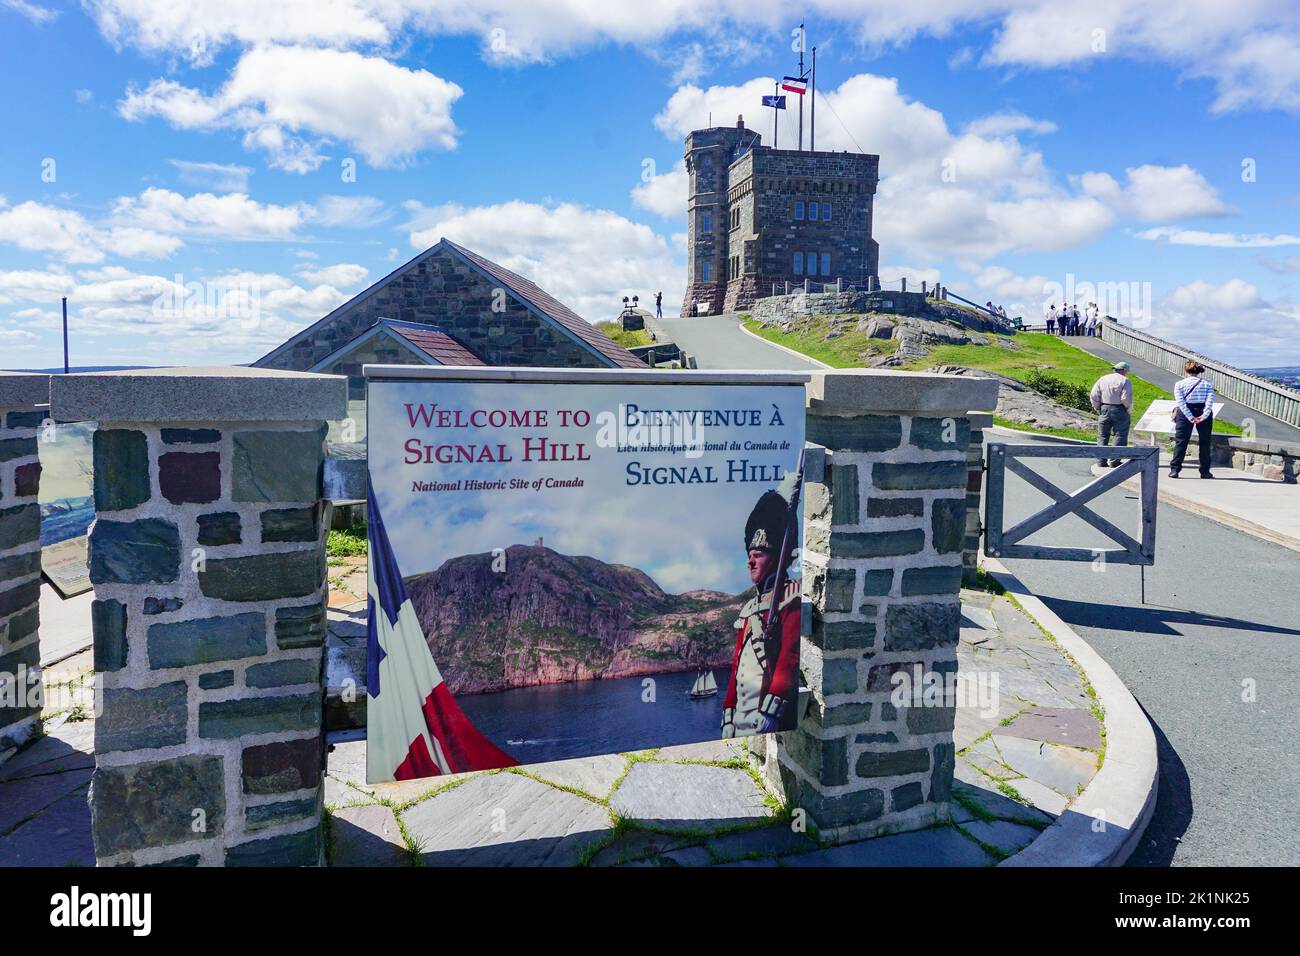 St. Johns, Newfoundland, Canada: Cabot Tower, atop Signal Hill, commemorates the 400th anniversary of John Cabot’s discovery of Newfoundland. Stock Photo